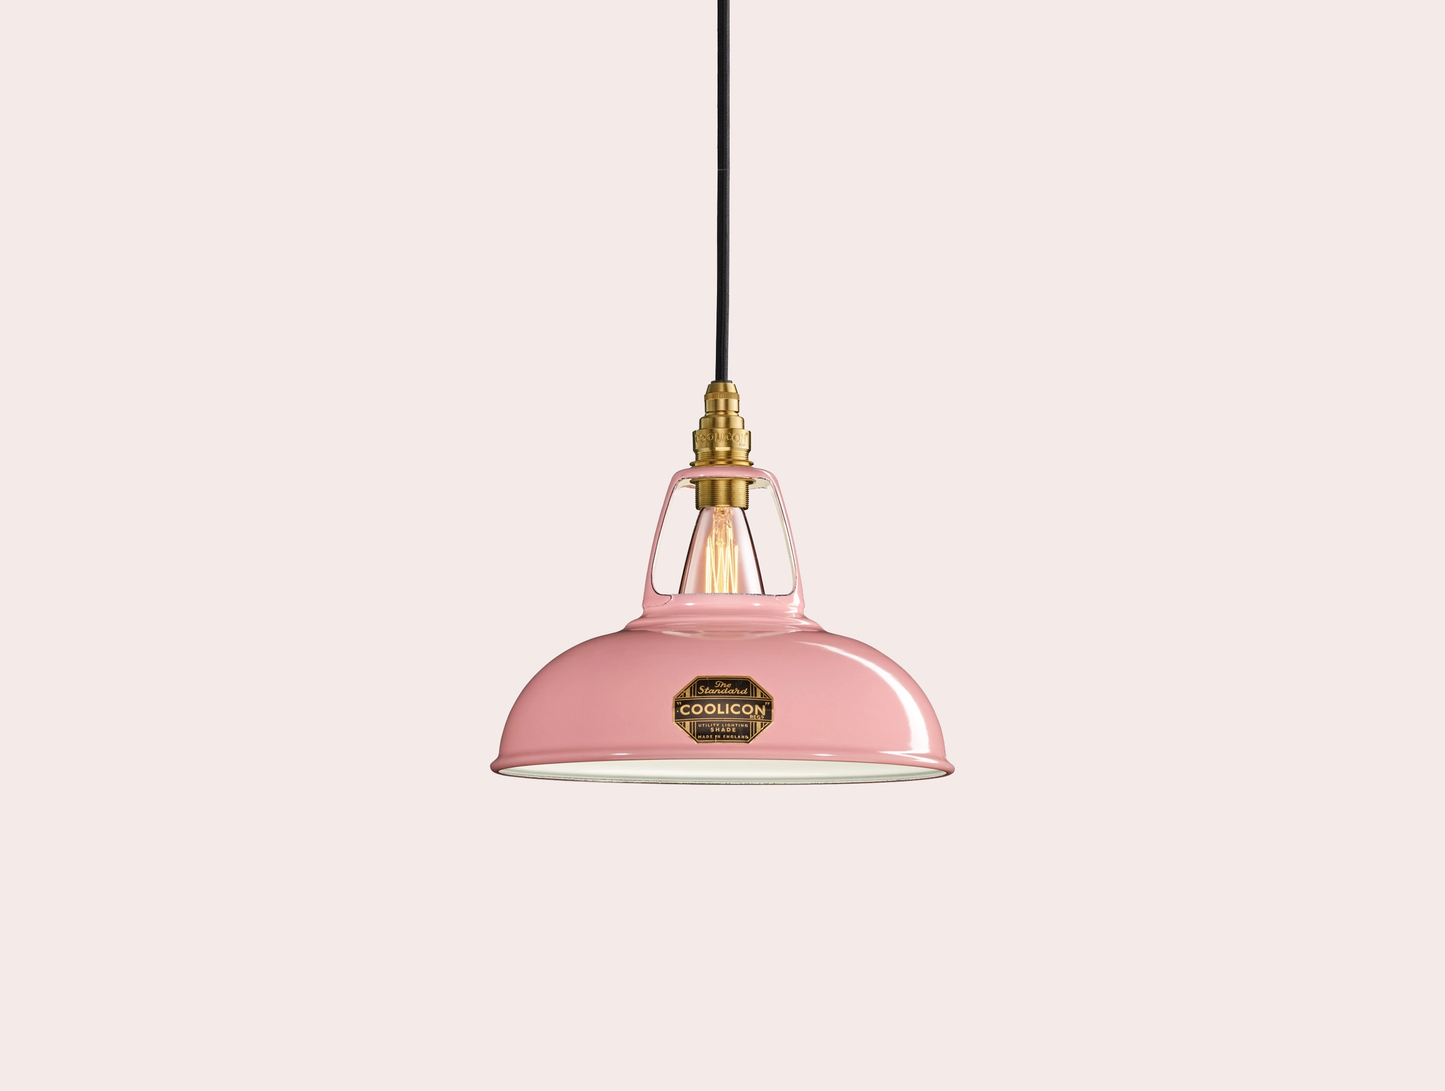 Powder Pink Coolicon lampshade with a Brass pendant set over a light pink background